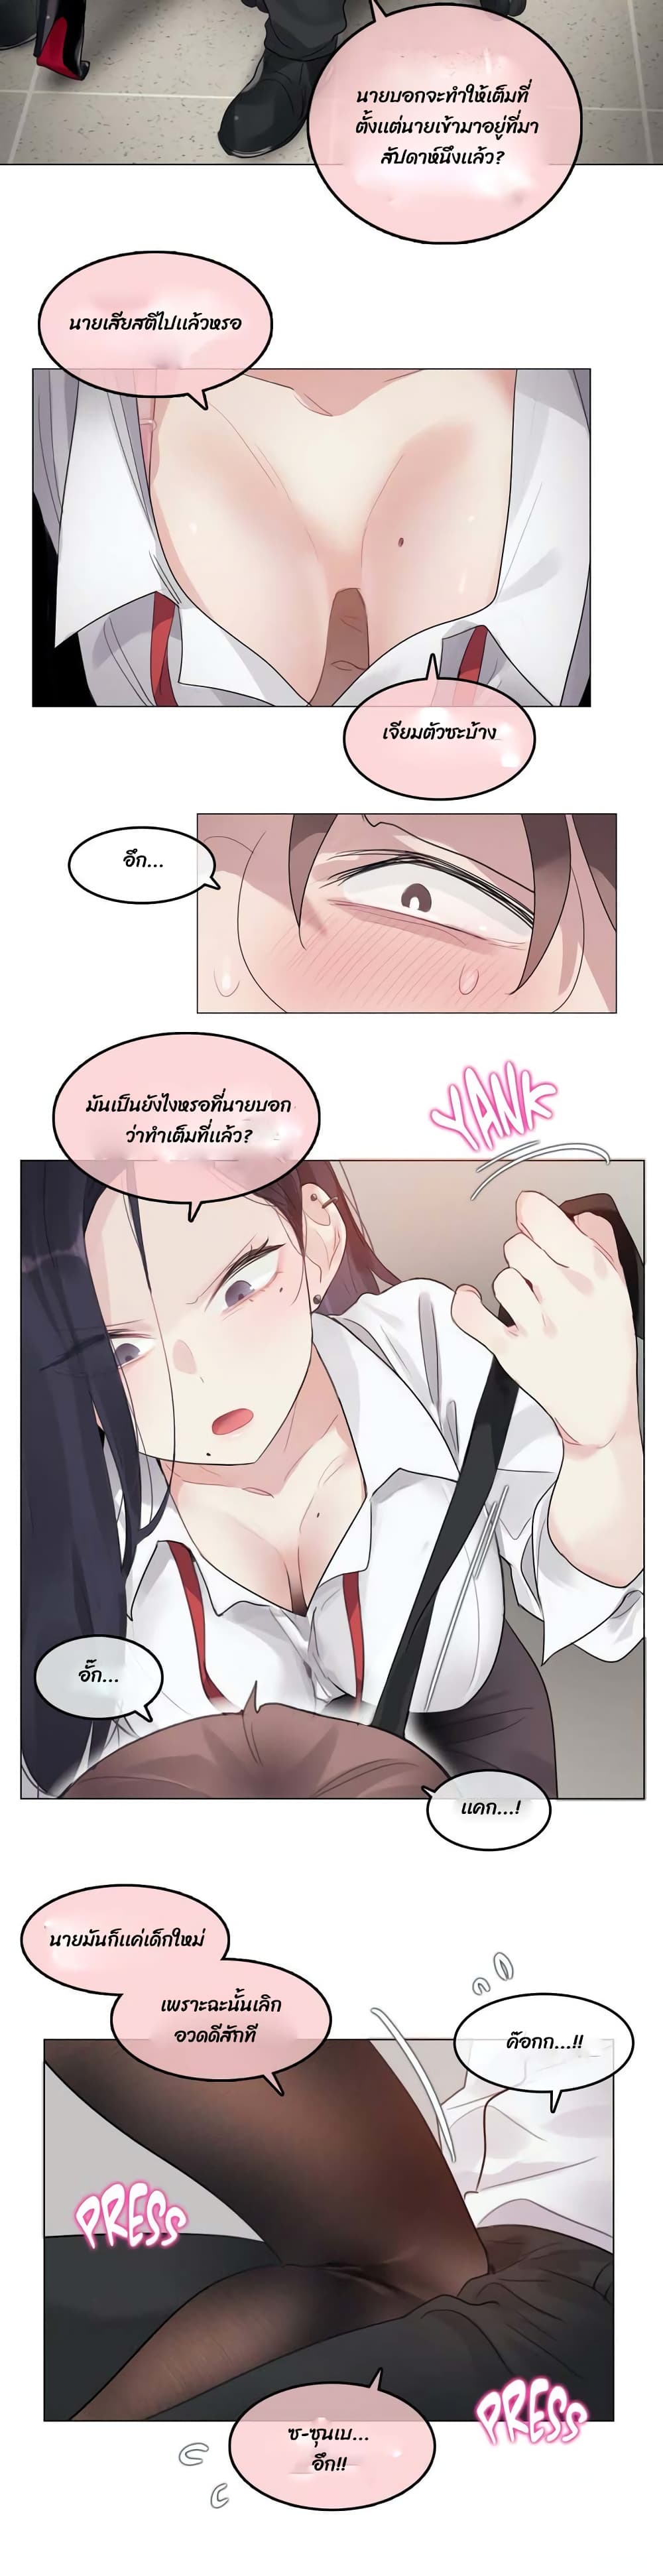 A Pervert's Daily Life 92 (24)